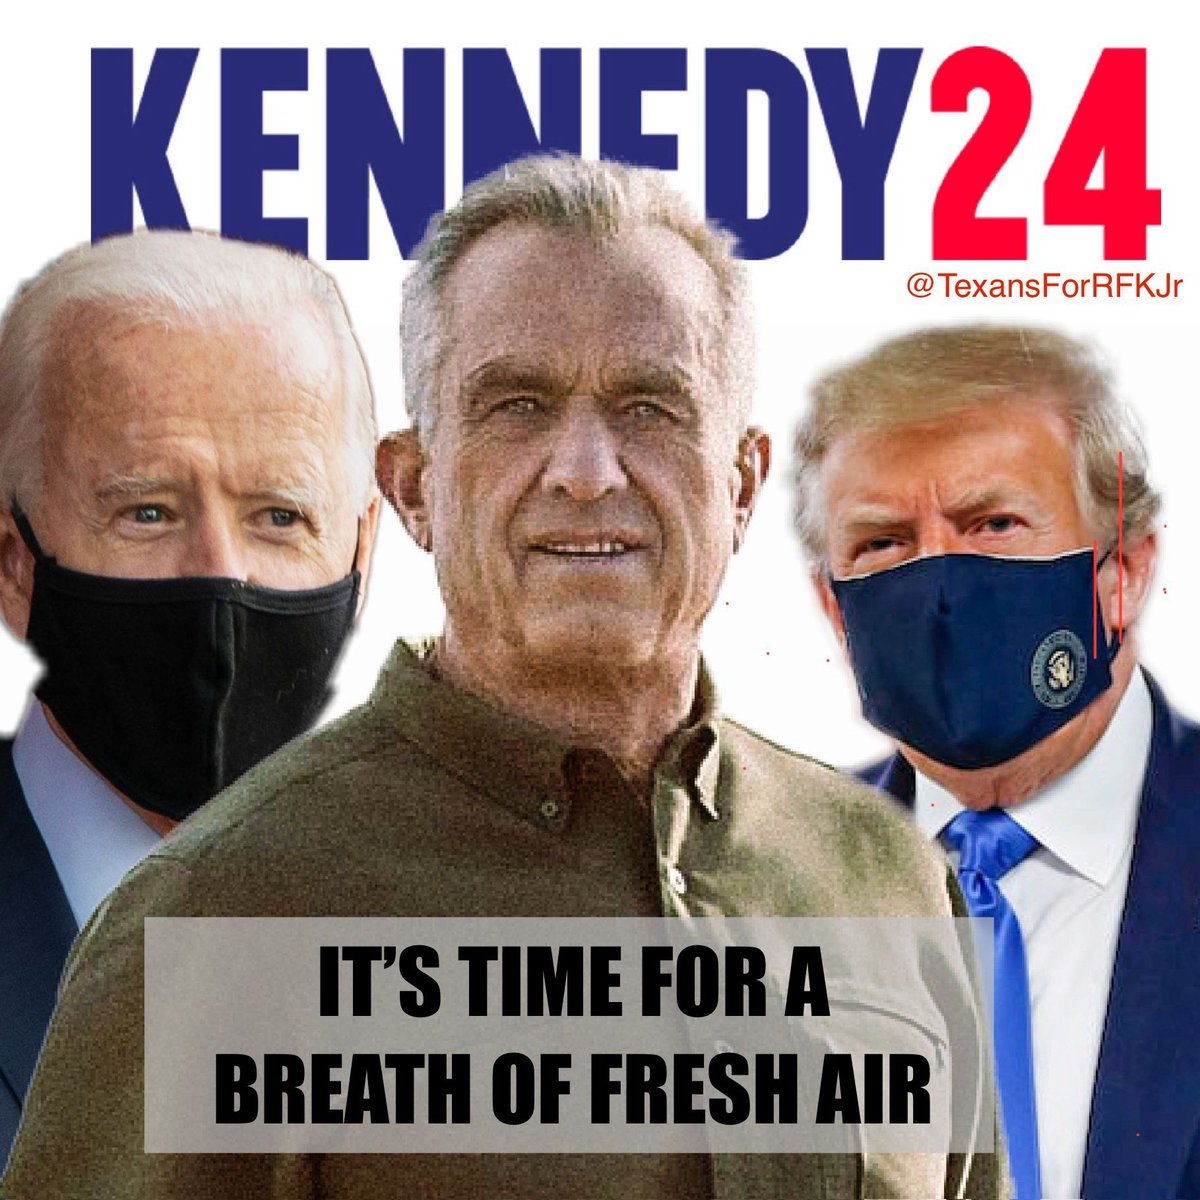 DonaldTrump & Joe Biden aren’t fighting for your LIBERTIES or FREEDOM, they’re fighting for authoritarianism & the right to subjugate you. @RobertKennedyJr is the only alternative candidate with a chance to beat the duopoly fighting for your RIGHTS, LIBERTIES, & FREEDOM!